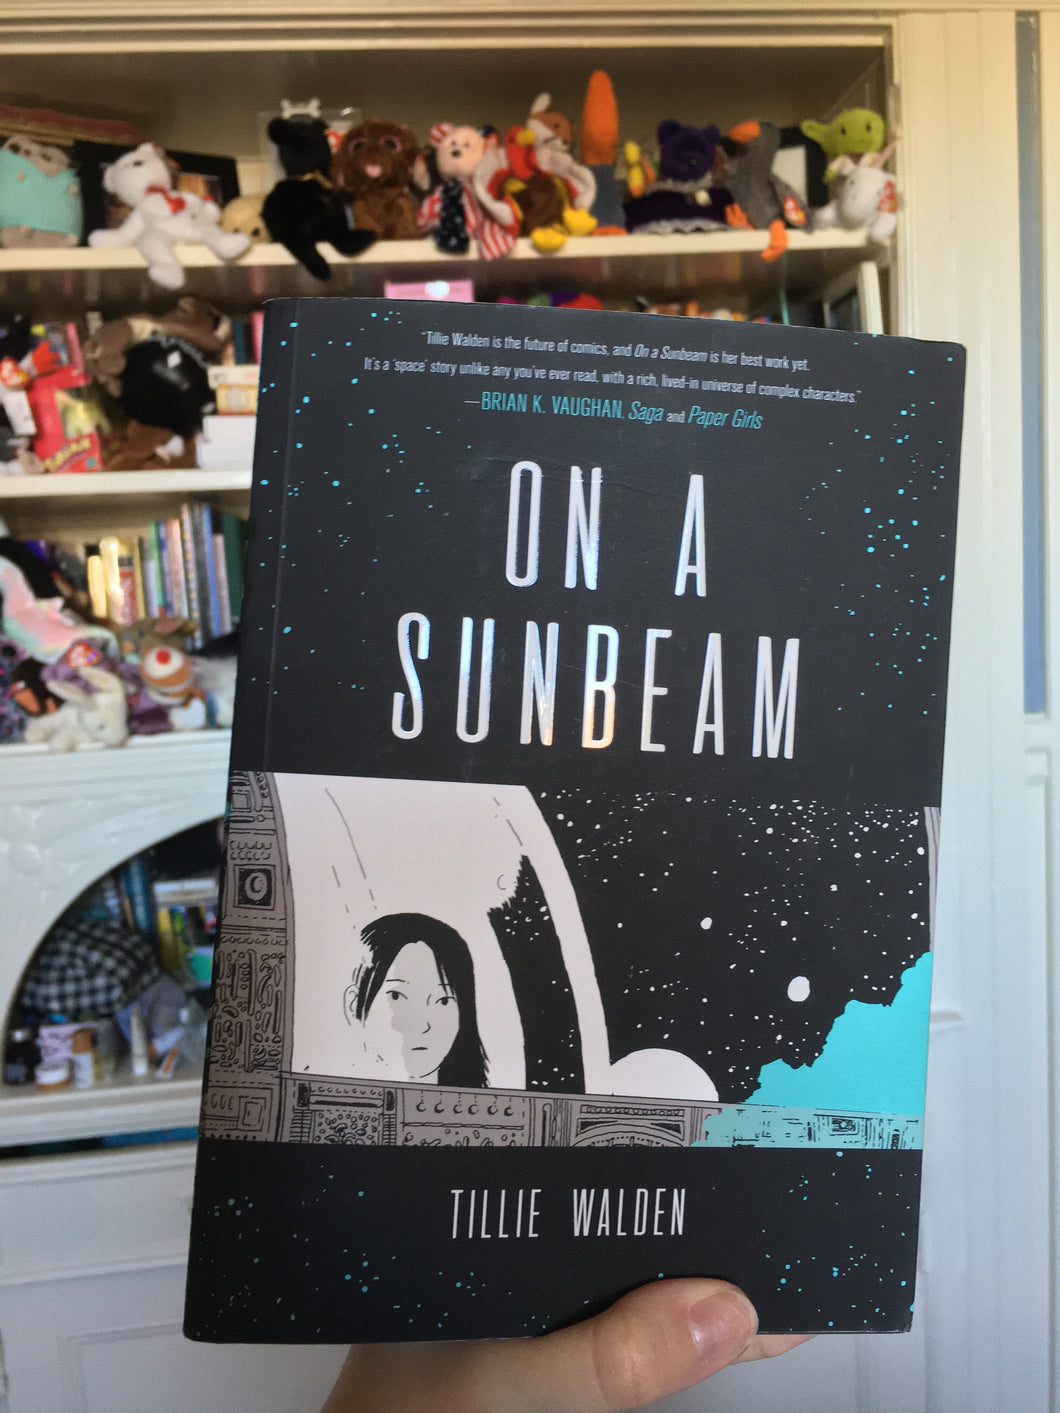 On a Sunbeam by Tillie Walden (used)